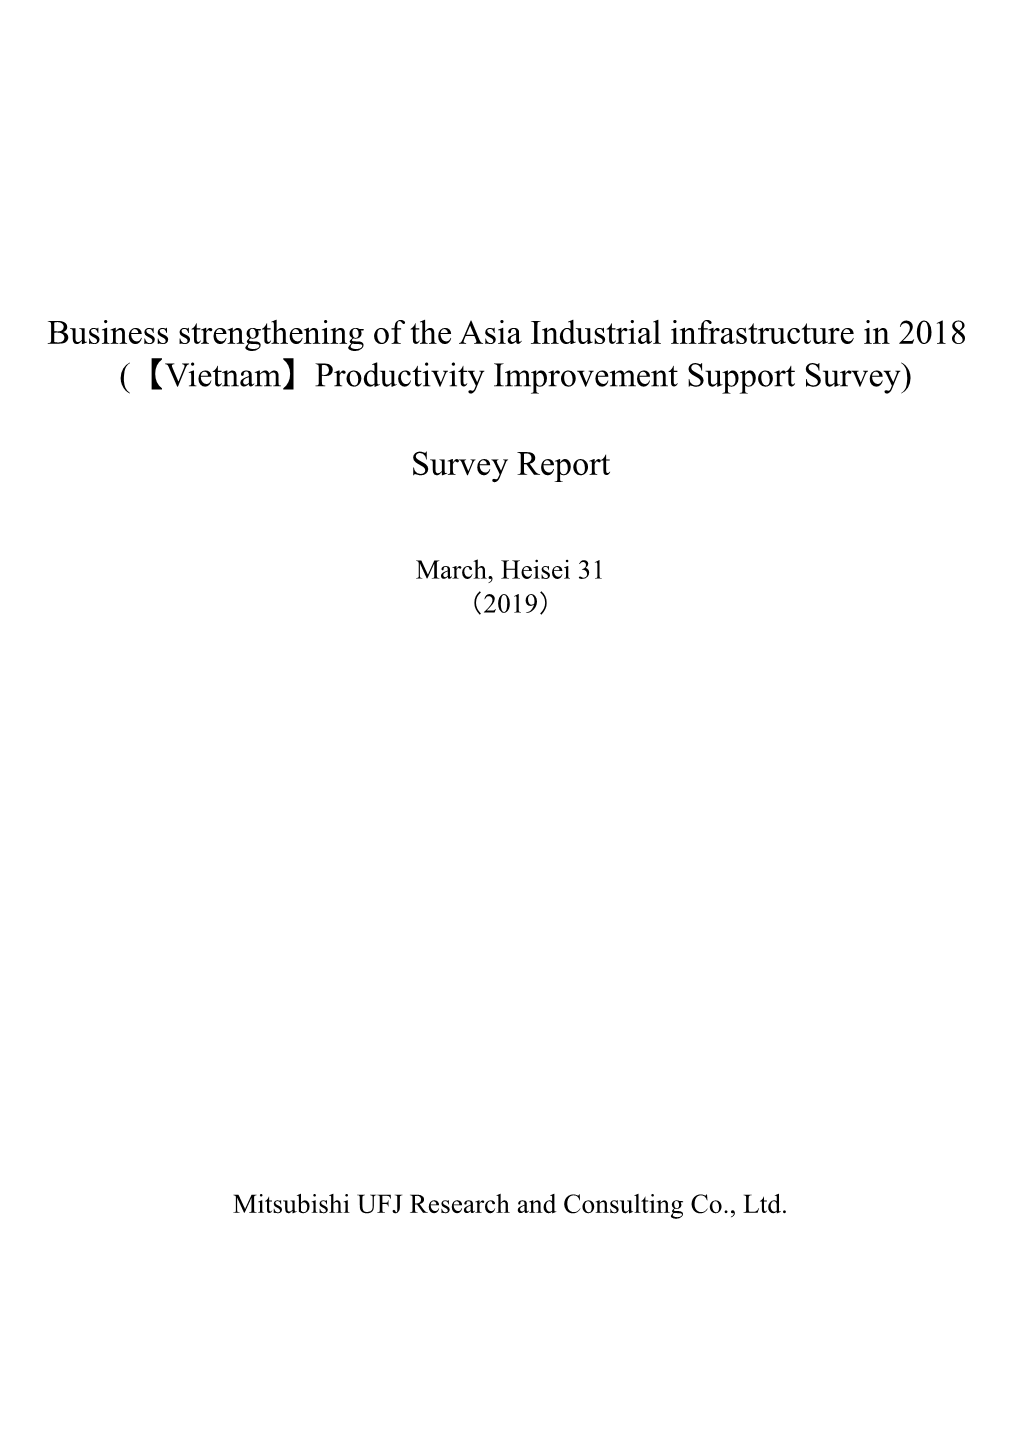 Business Strengthening of the Asia Industrial Infrastructure in 2018 (【Vietnam】Productivity Improvement Support Survey) Survey Report